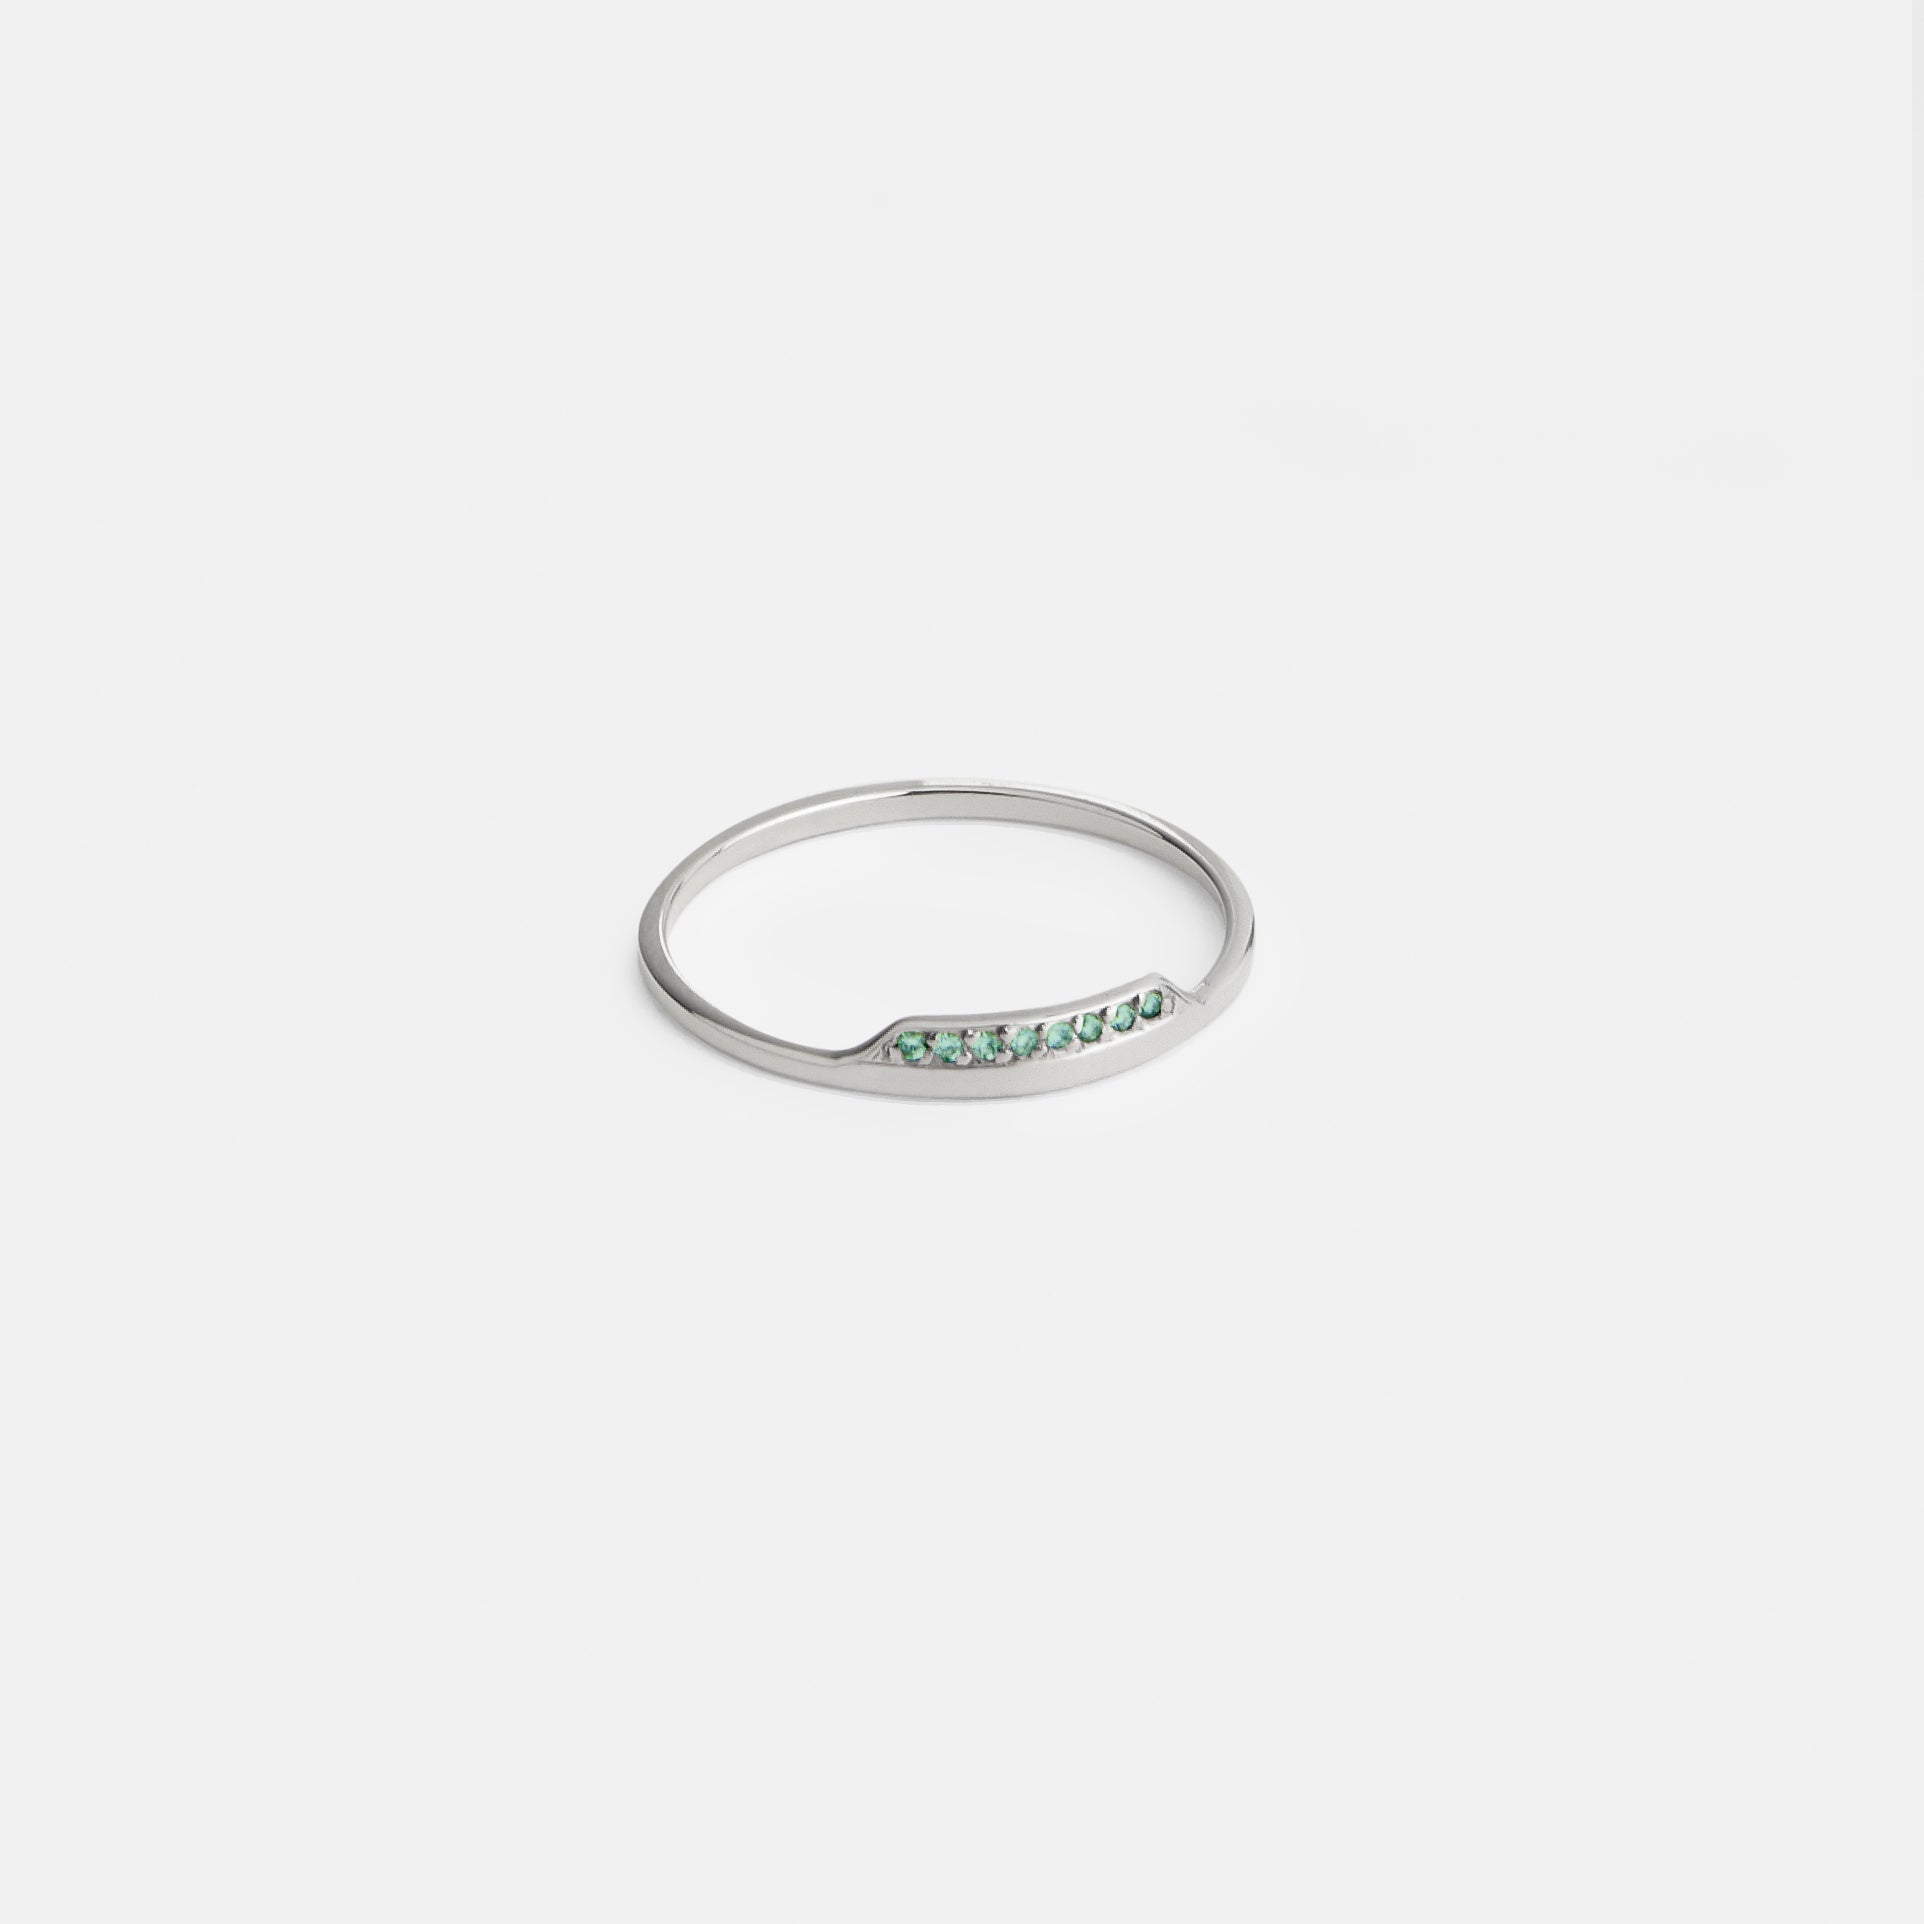 Salo Thin Ring in 14k White Gold set with Green Diamonds By SHW Fine Jewelry NYC